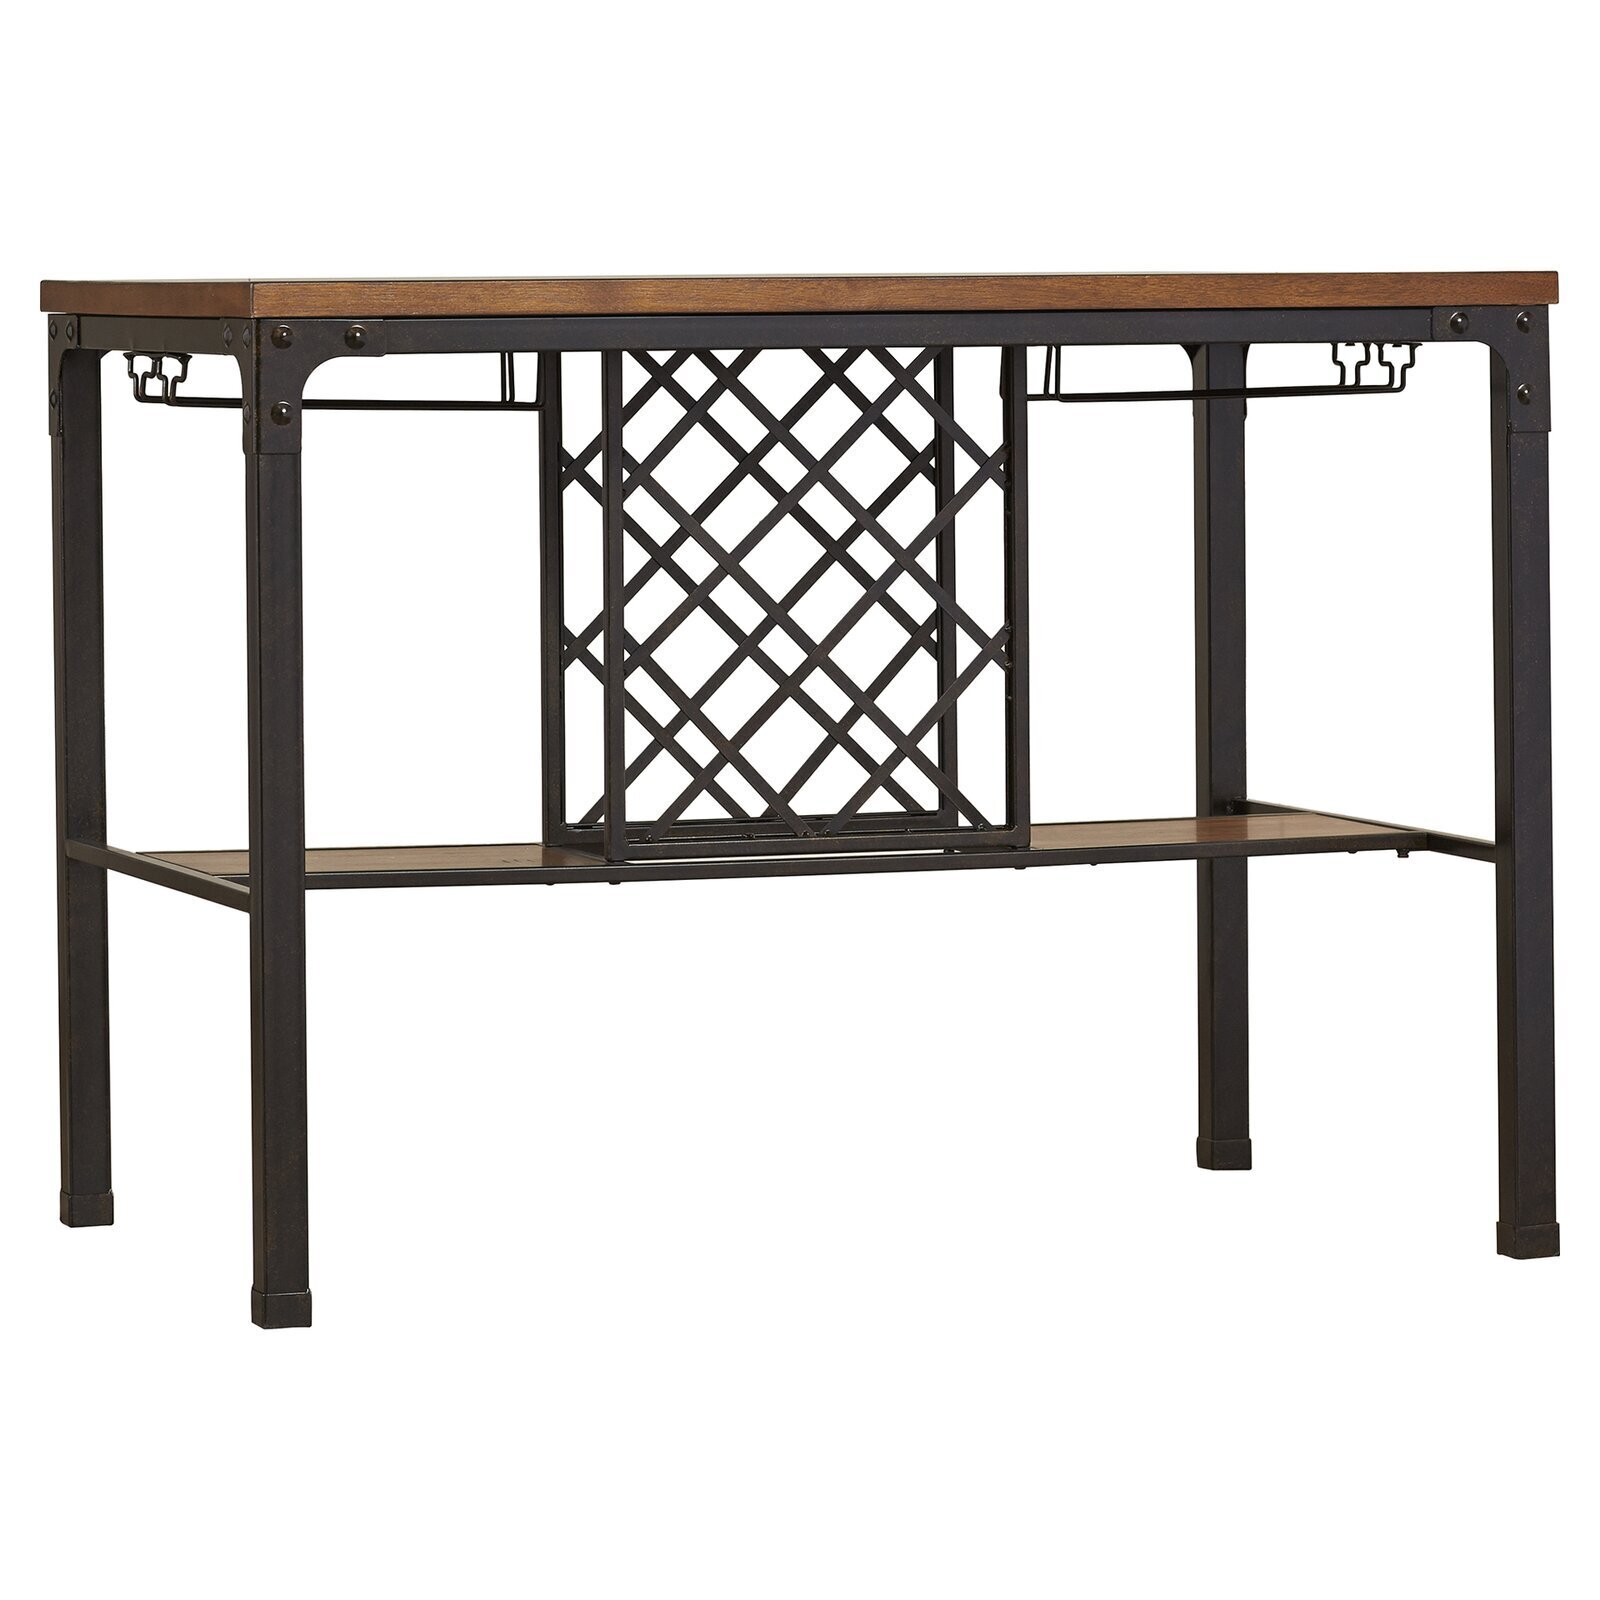 Rustic industrial dining room table with wine storage